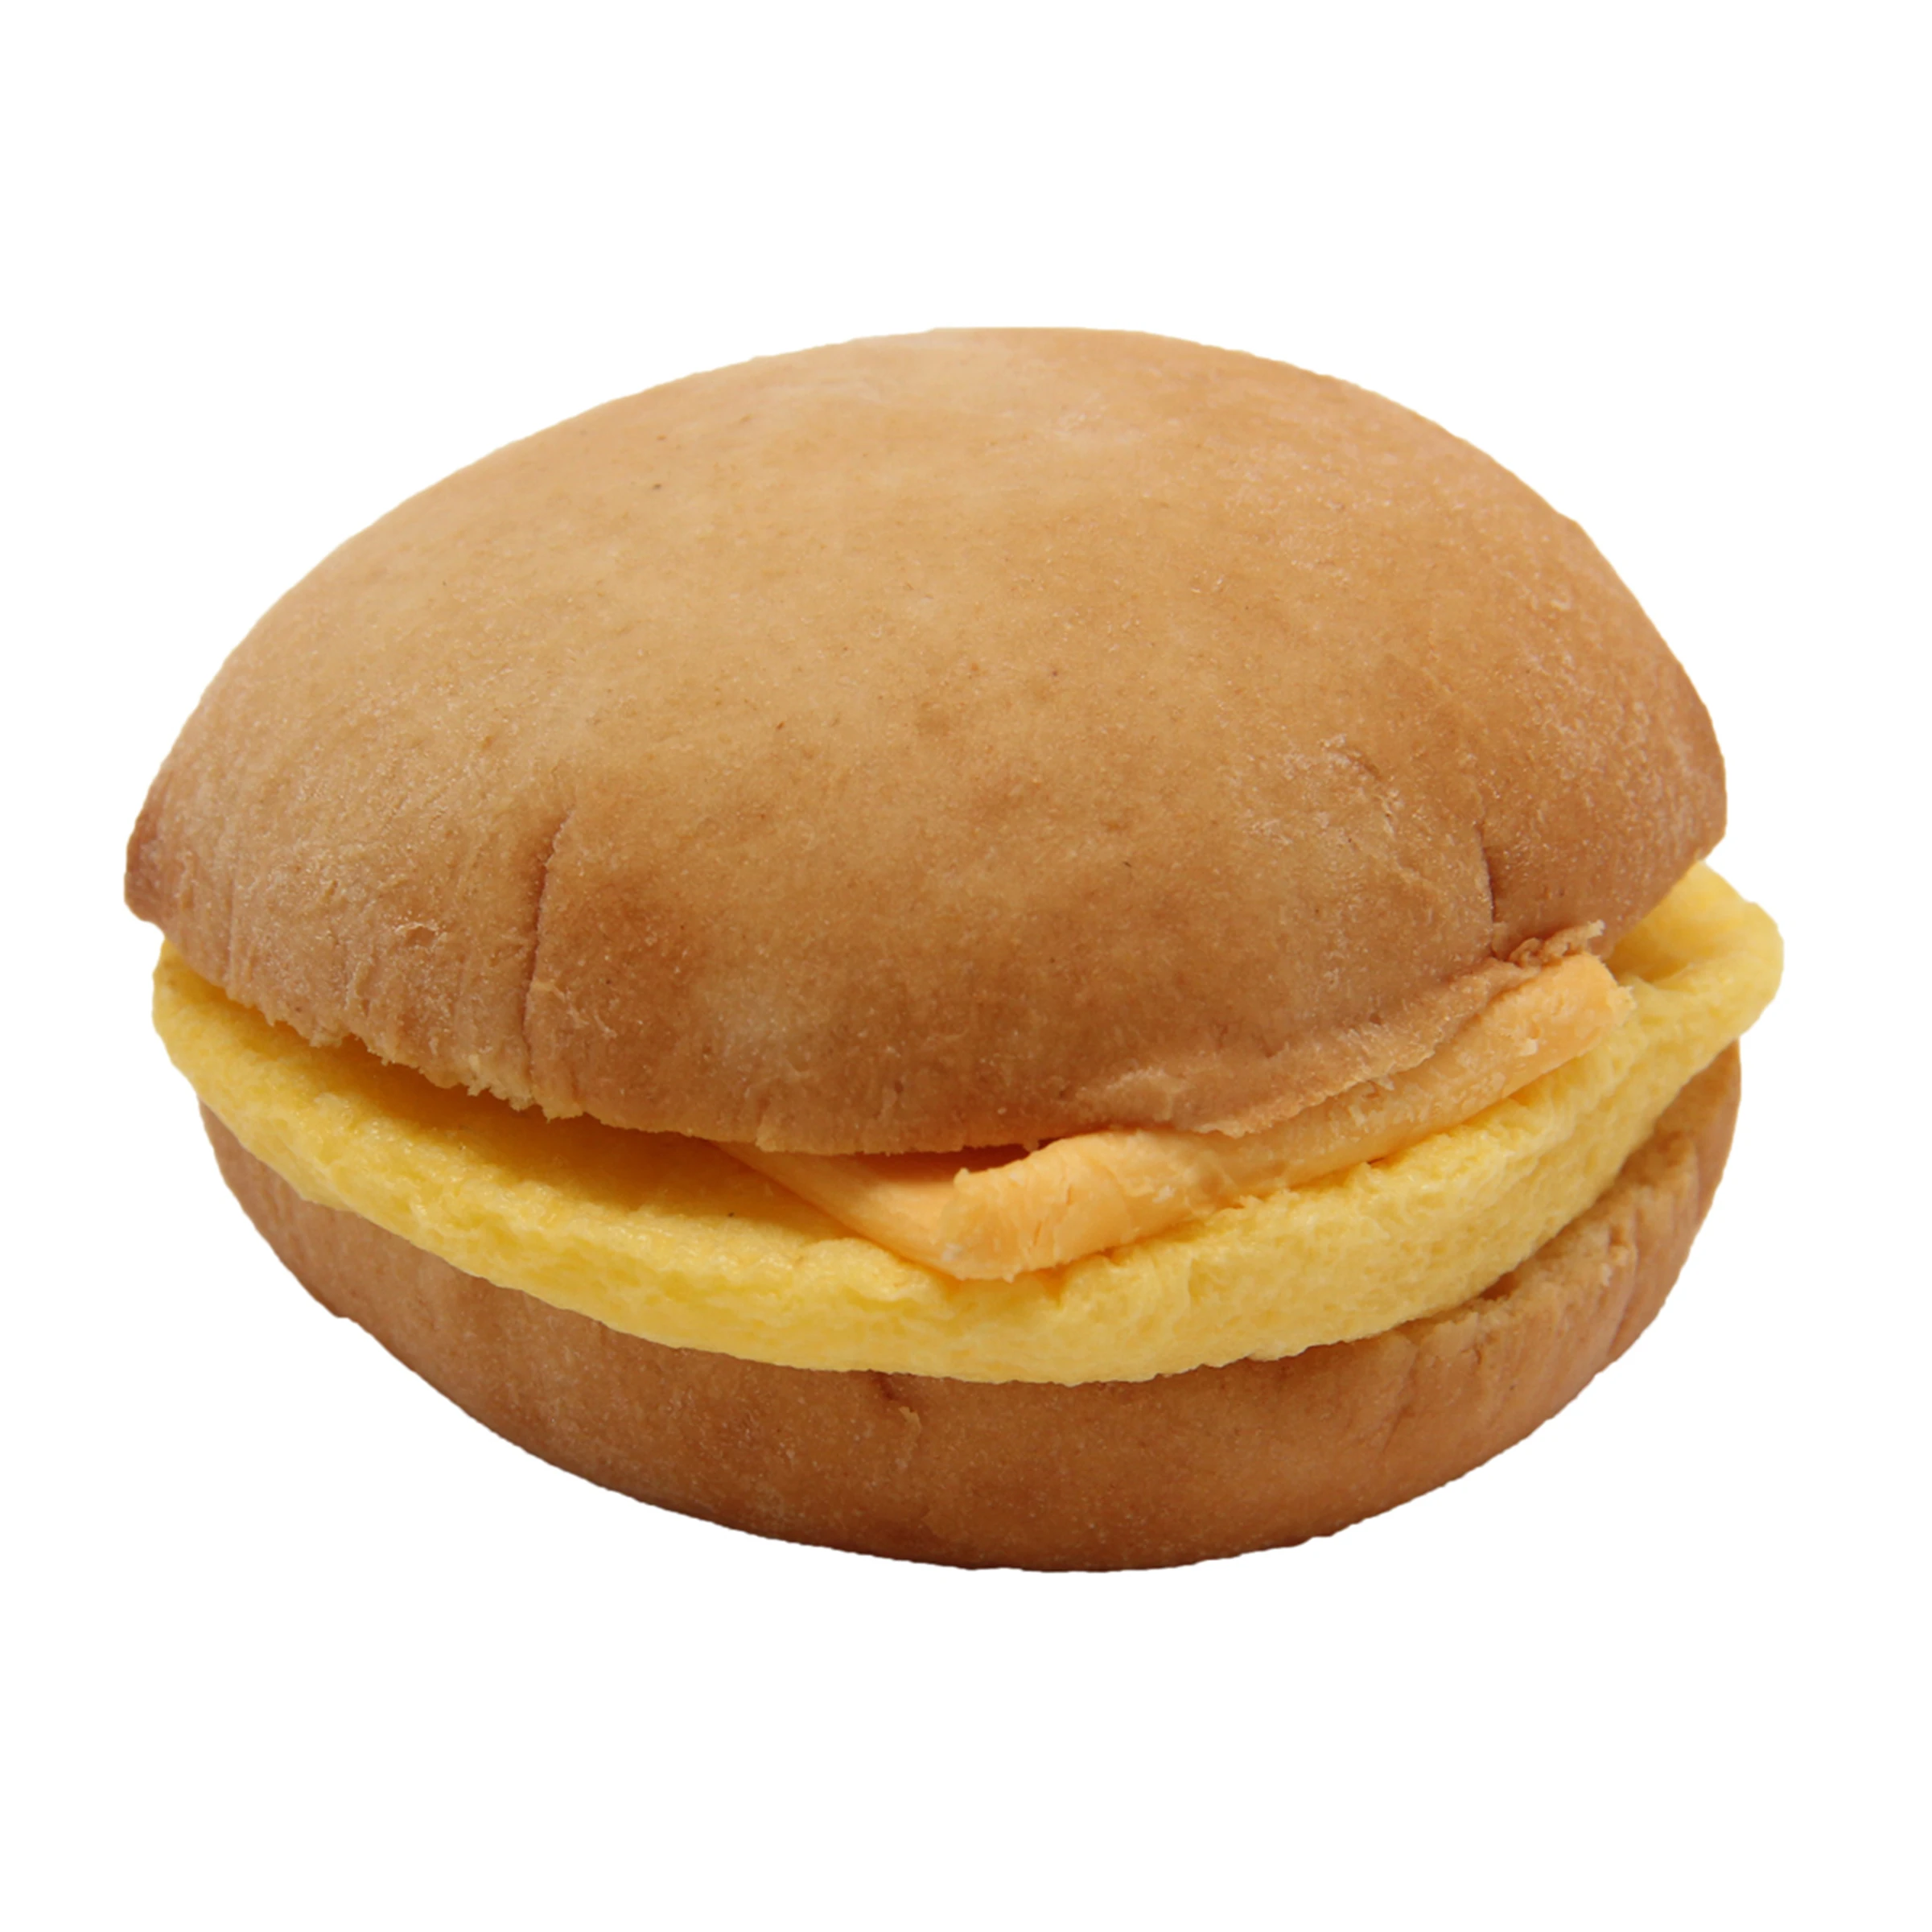 AdvancePierre™ Fully Cooked Egg & Cheese on a Whole Grain Bun, 2.36ozhttp://images.salsify.com/image/upload/s--TZ3hruLs--/n0fcssj9qi1usypp5pqh.webp